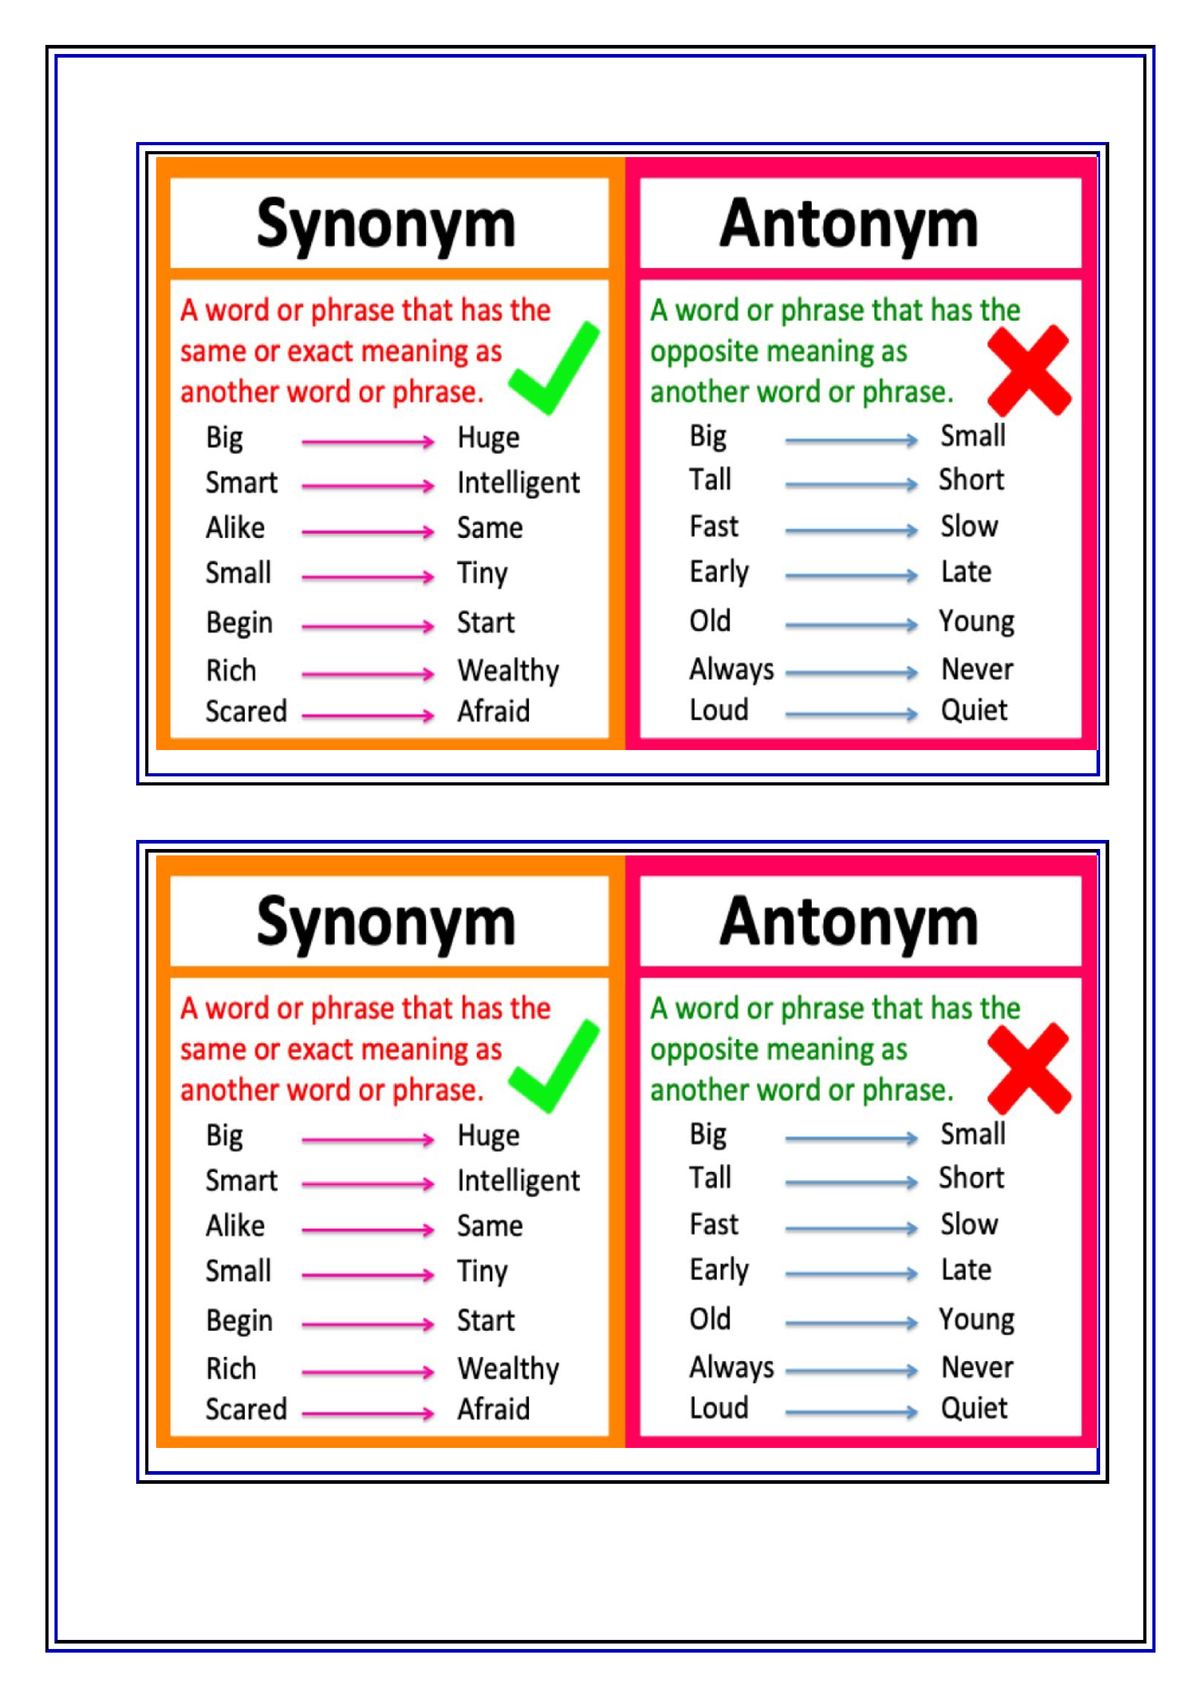 Another word for SPIKE > Synonyms & Antonyms